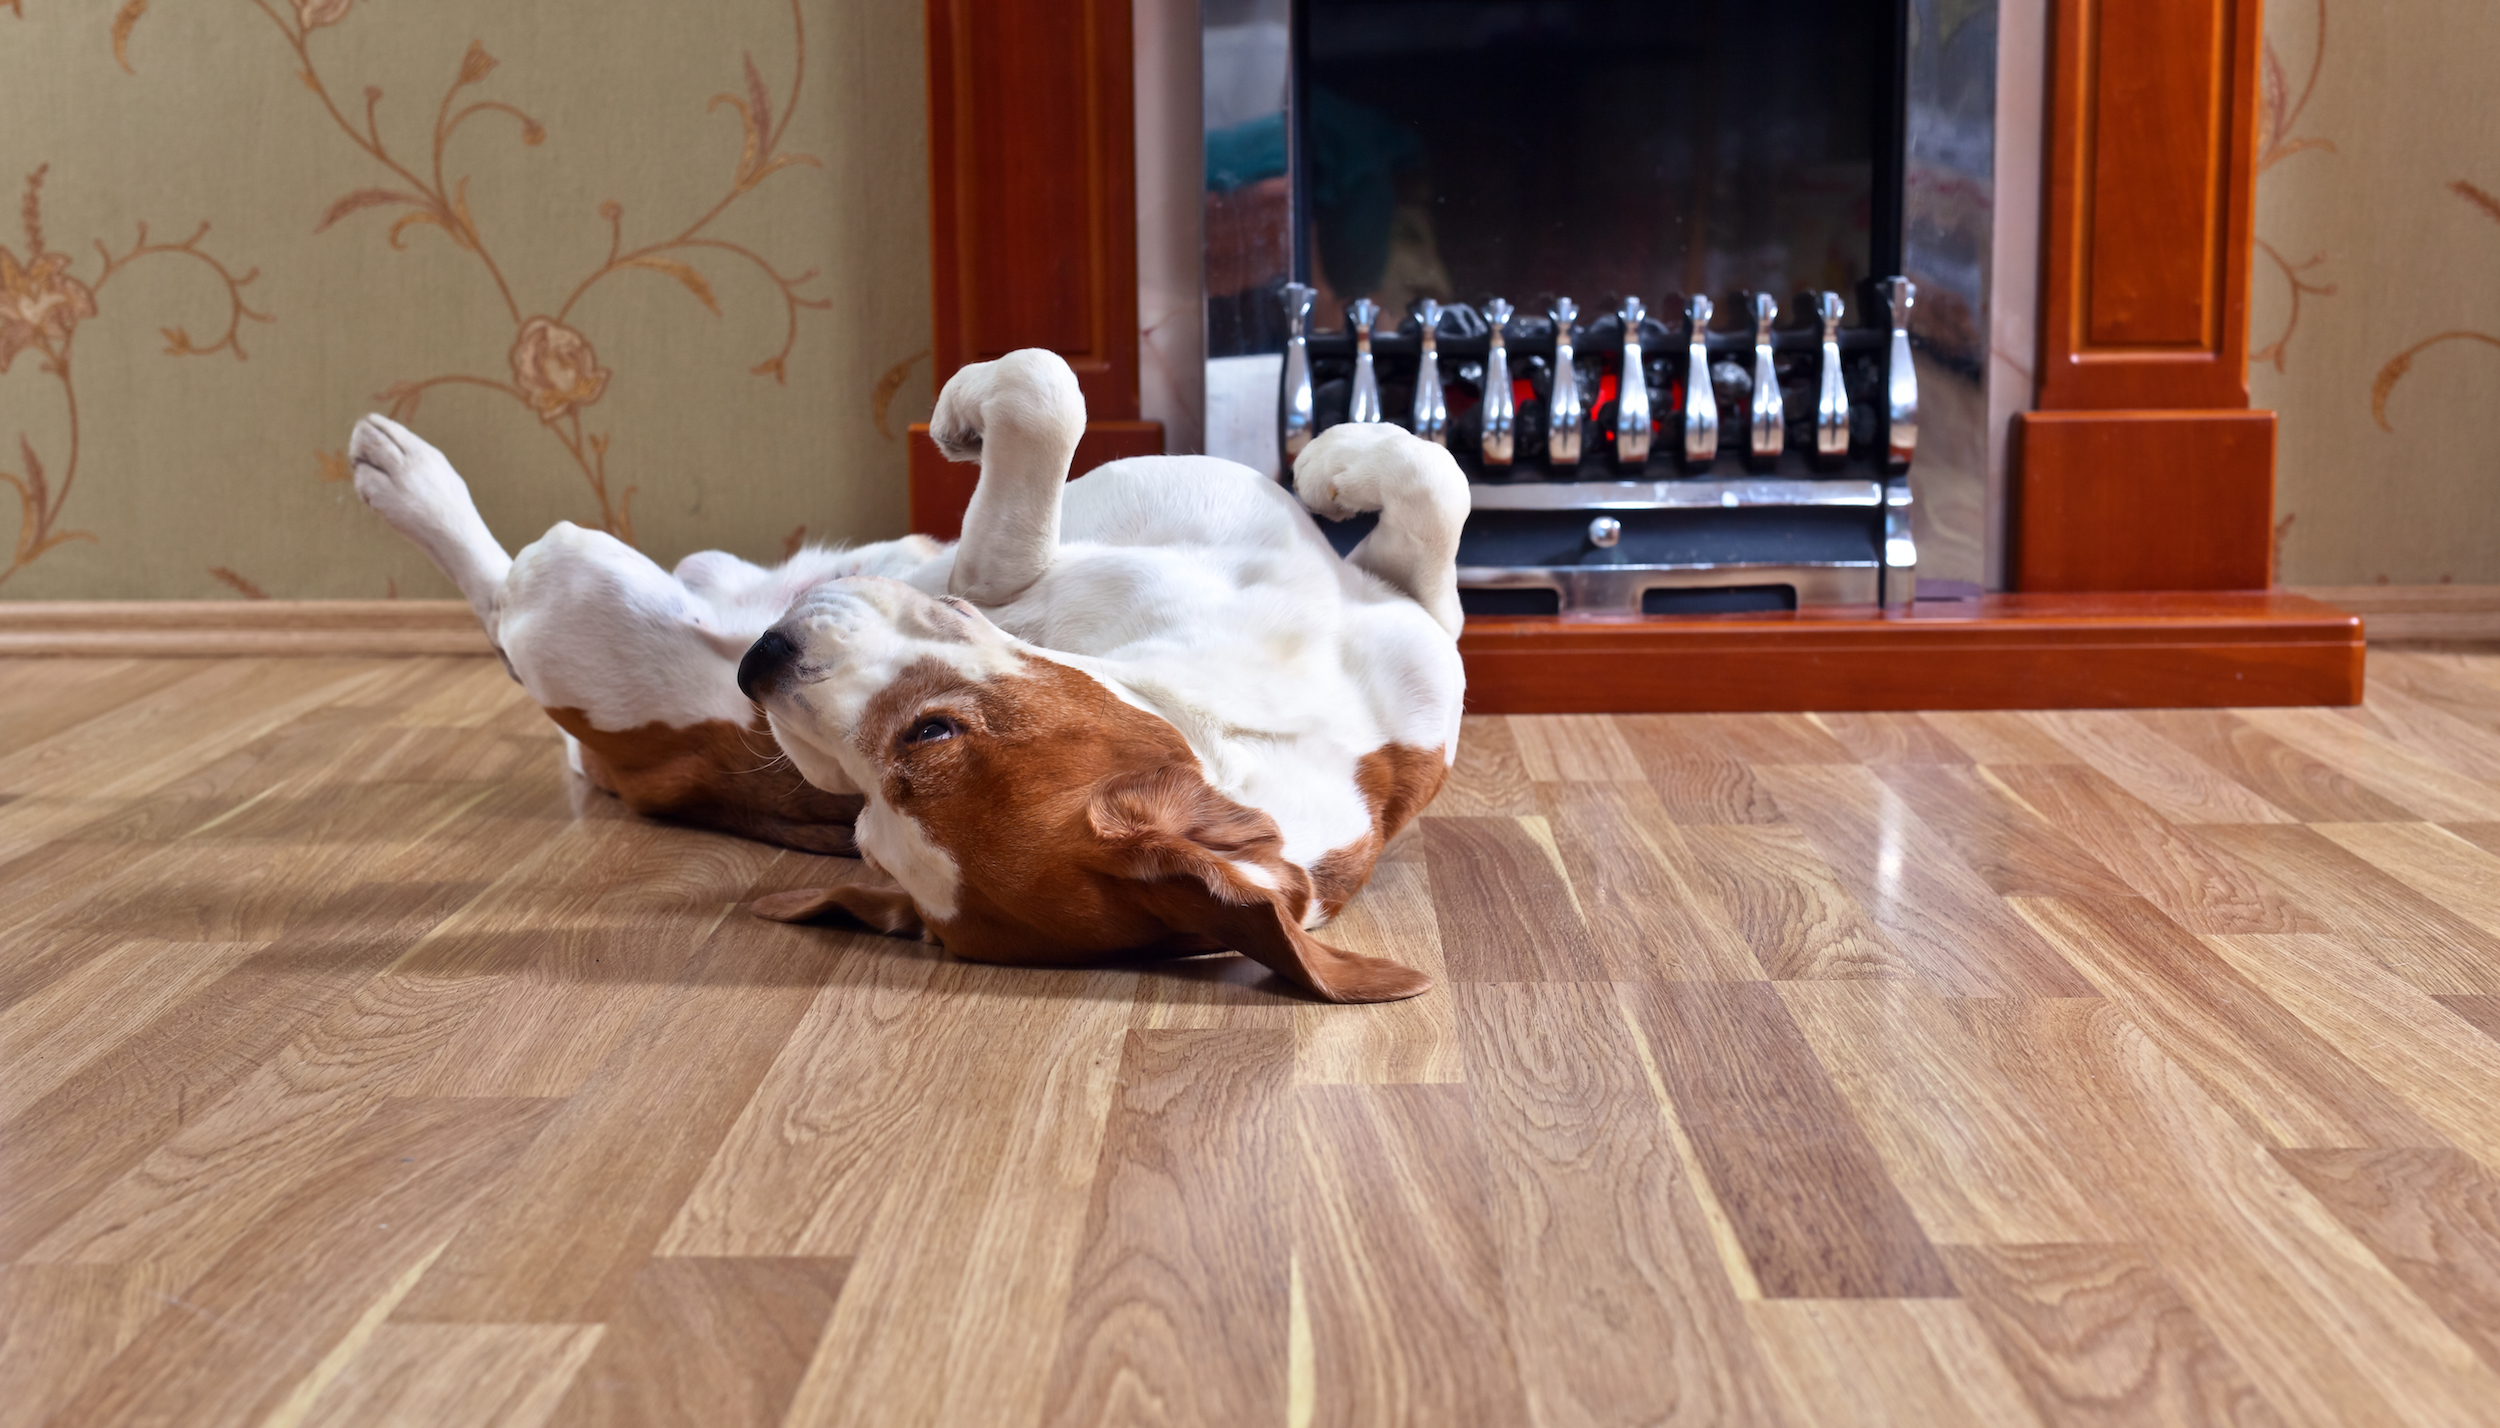 Dog rolling on wooden floor near a fireplace